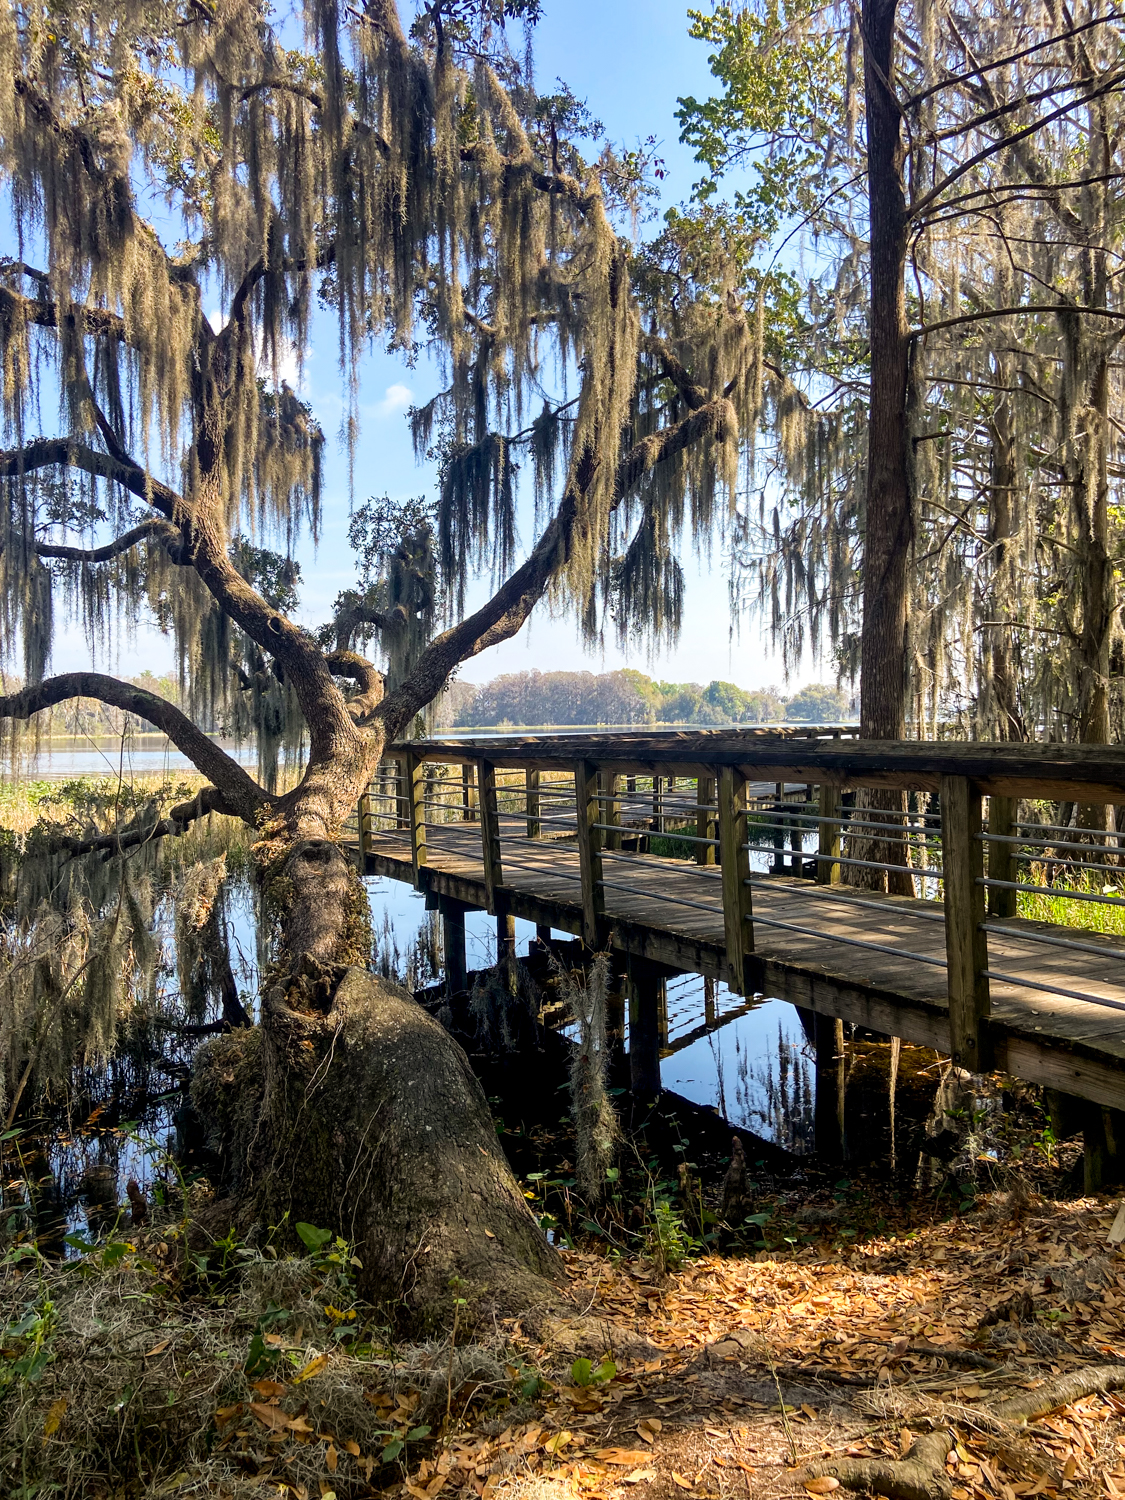 Travel Tips for A Visit to Inverness FL. A recap of where we stayed, fun outdoor activities to try, and delicious restaurants for a small-town girls' trip!